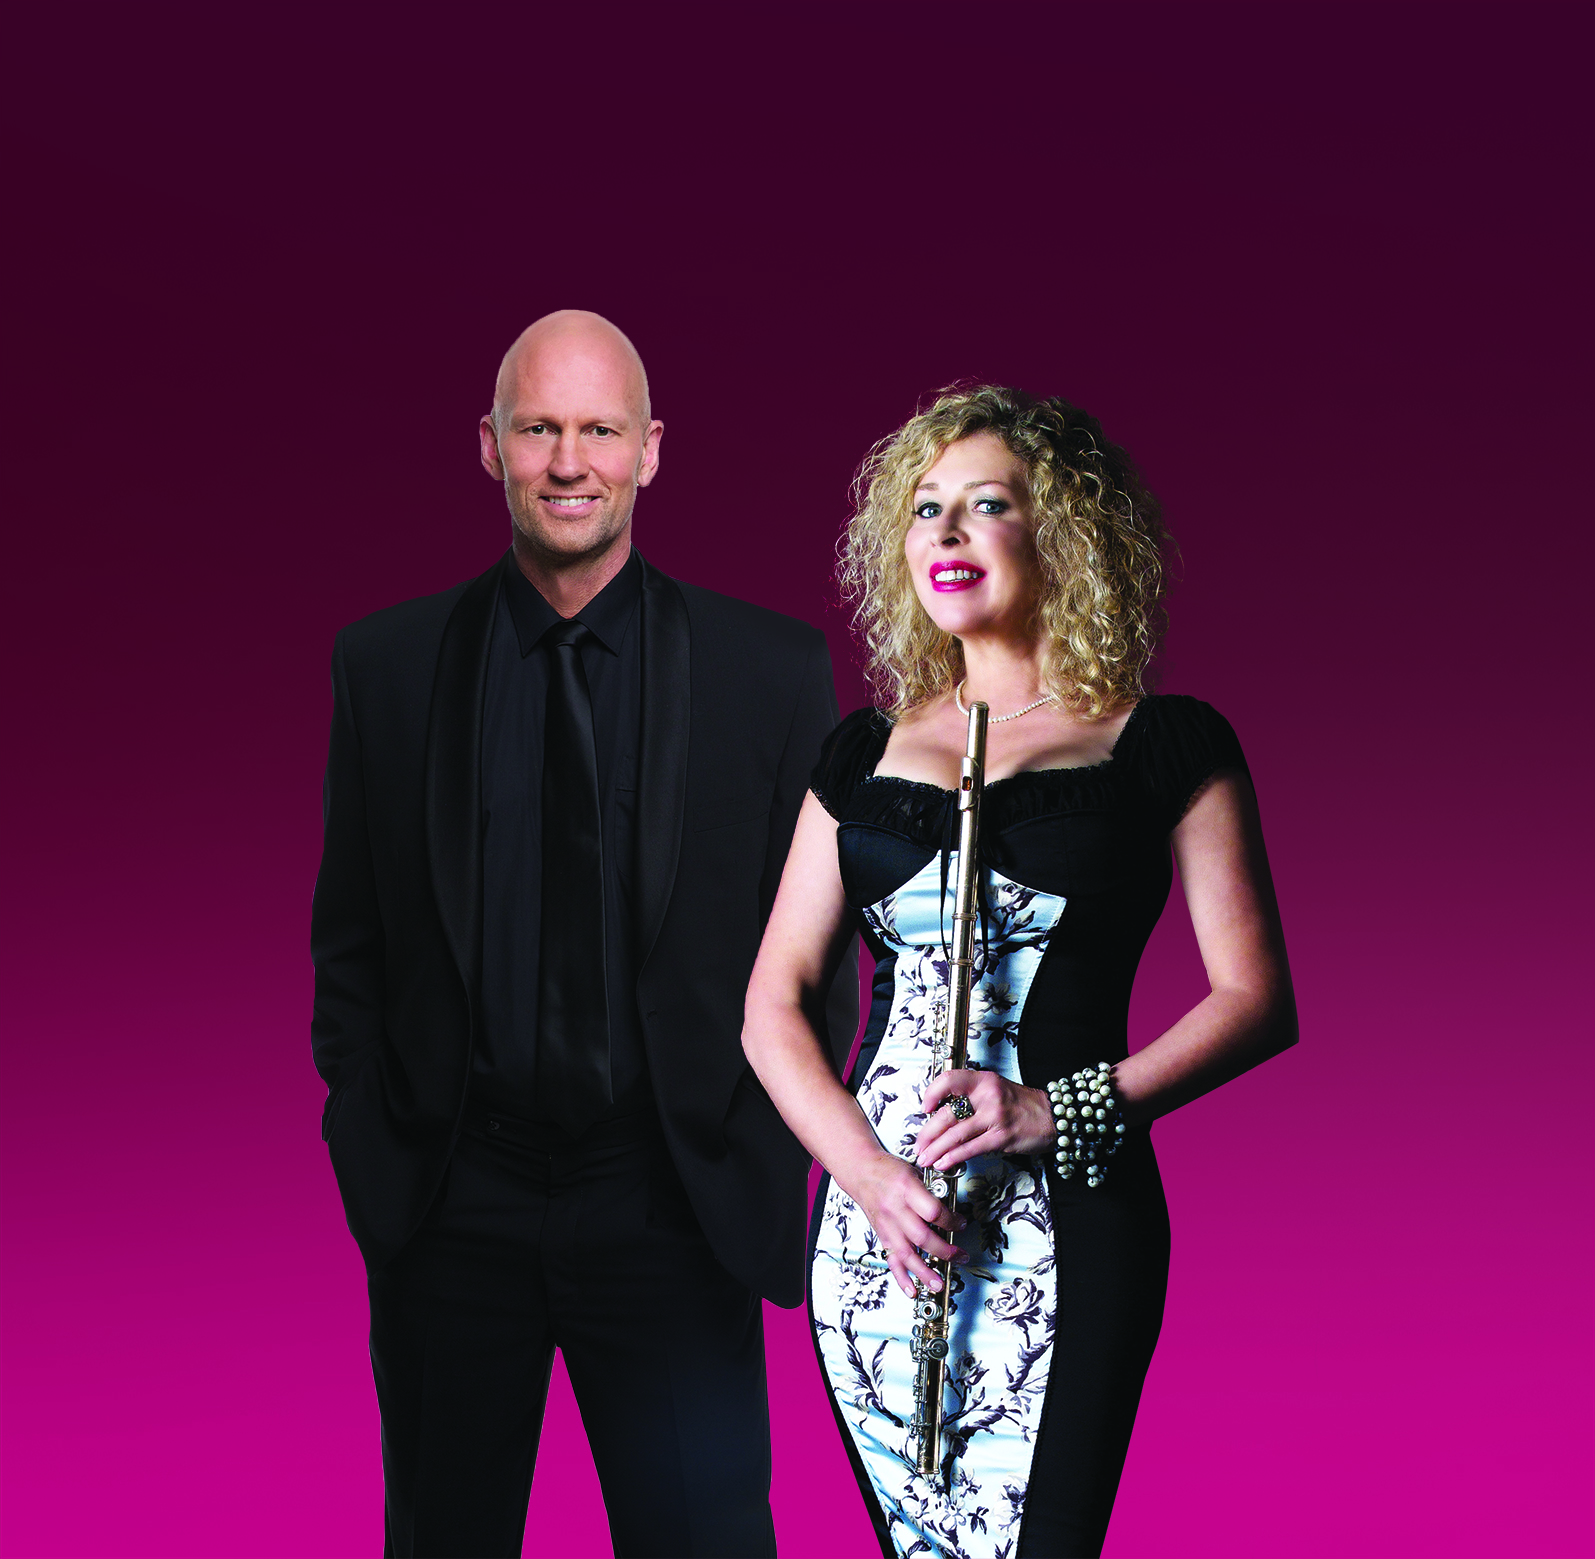 Teddy Tahu Rhodes And Jane Rutter In Concert